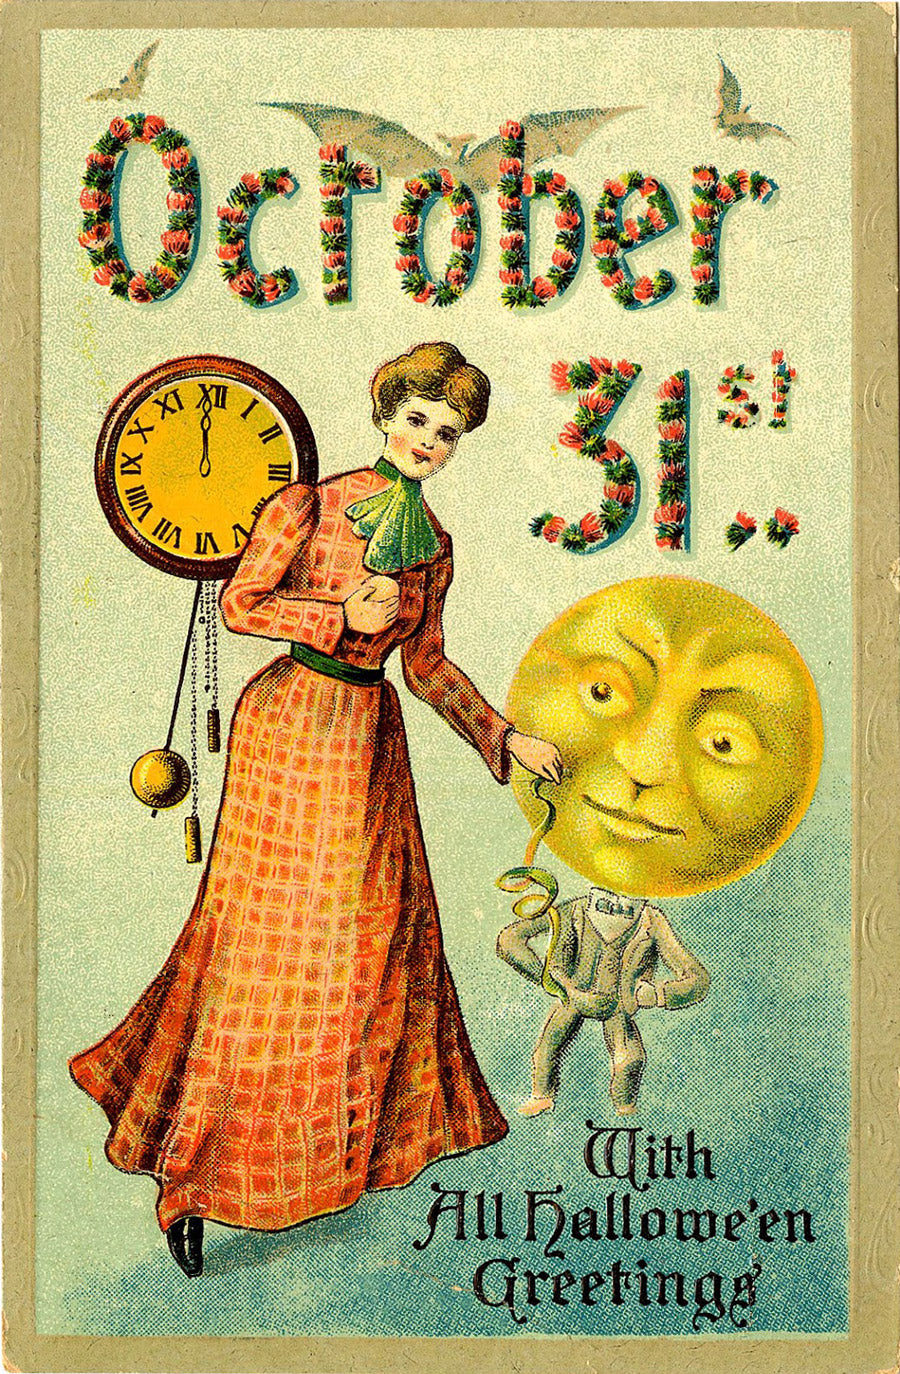 A Halloween postcard from the 1900s with a woman and a child in a moon costume with the words "October 31st, with all Hallowe'en greetings."